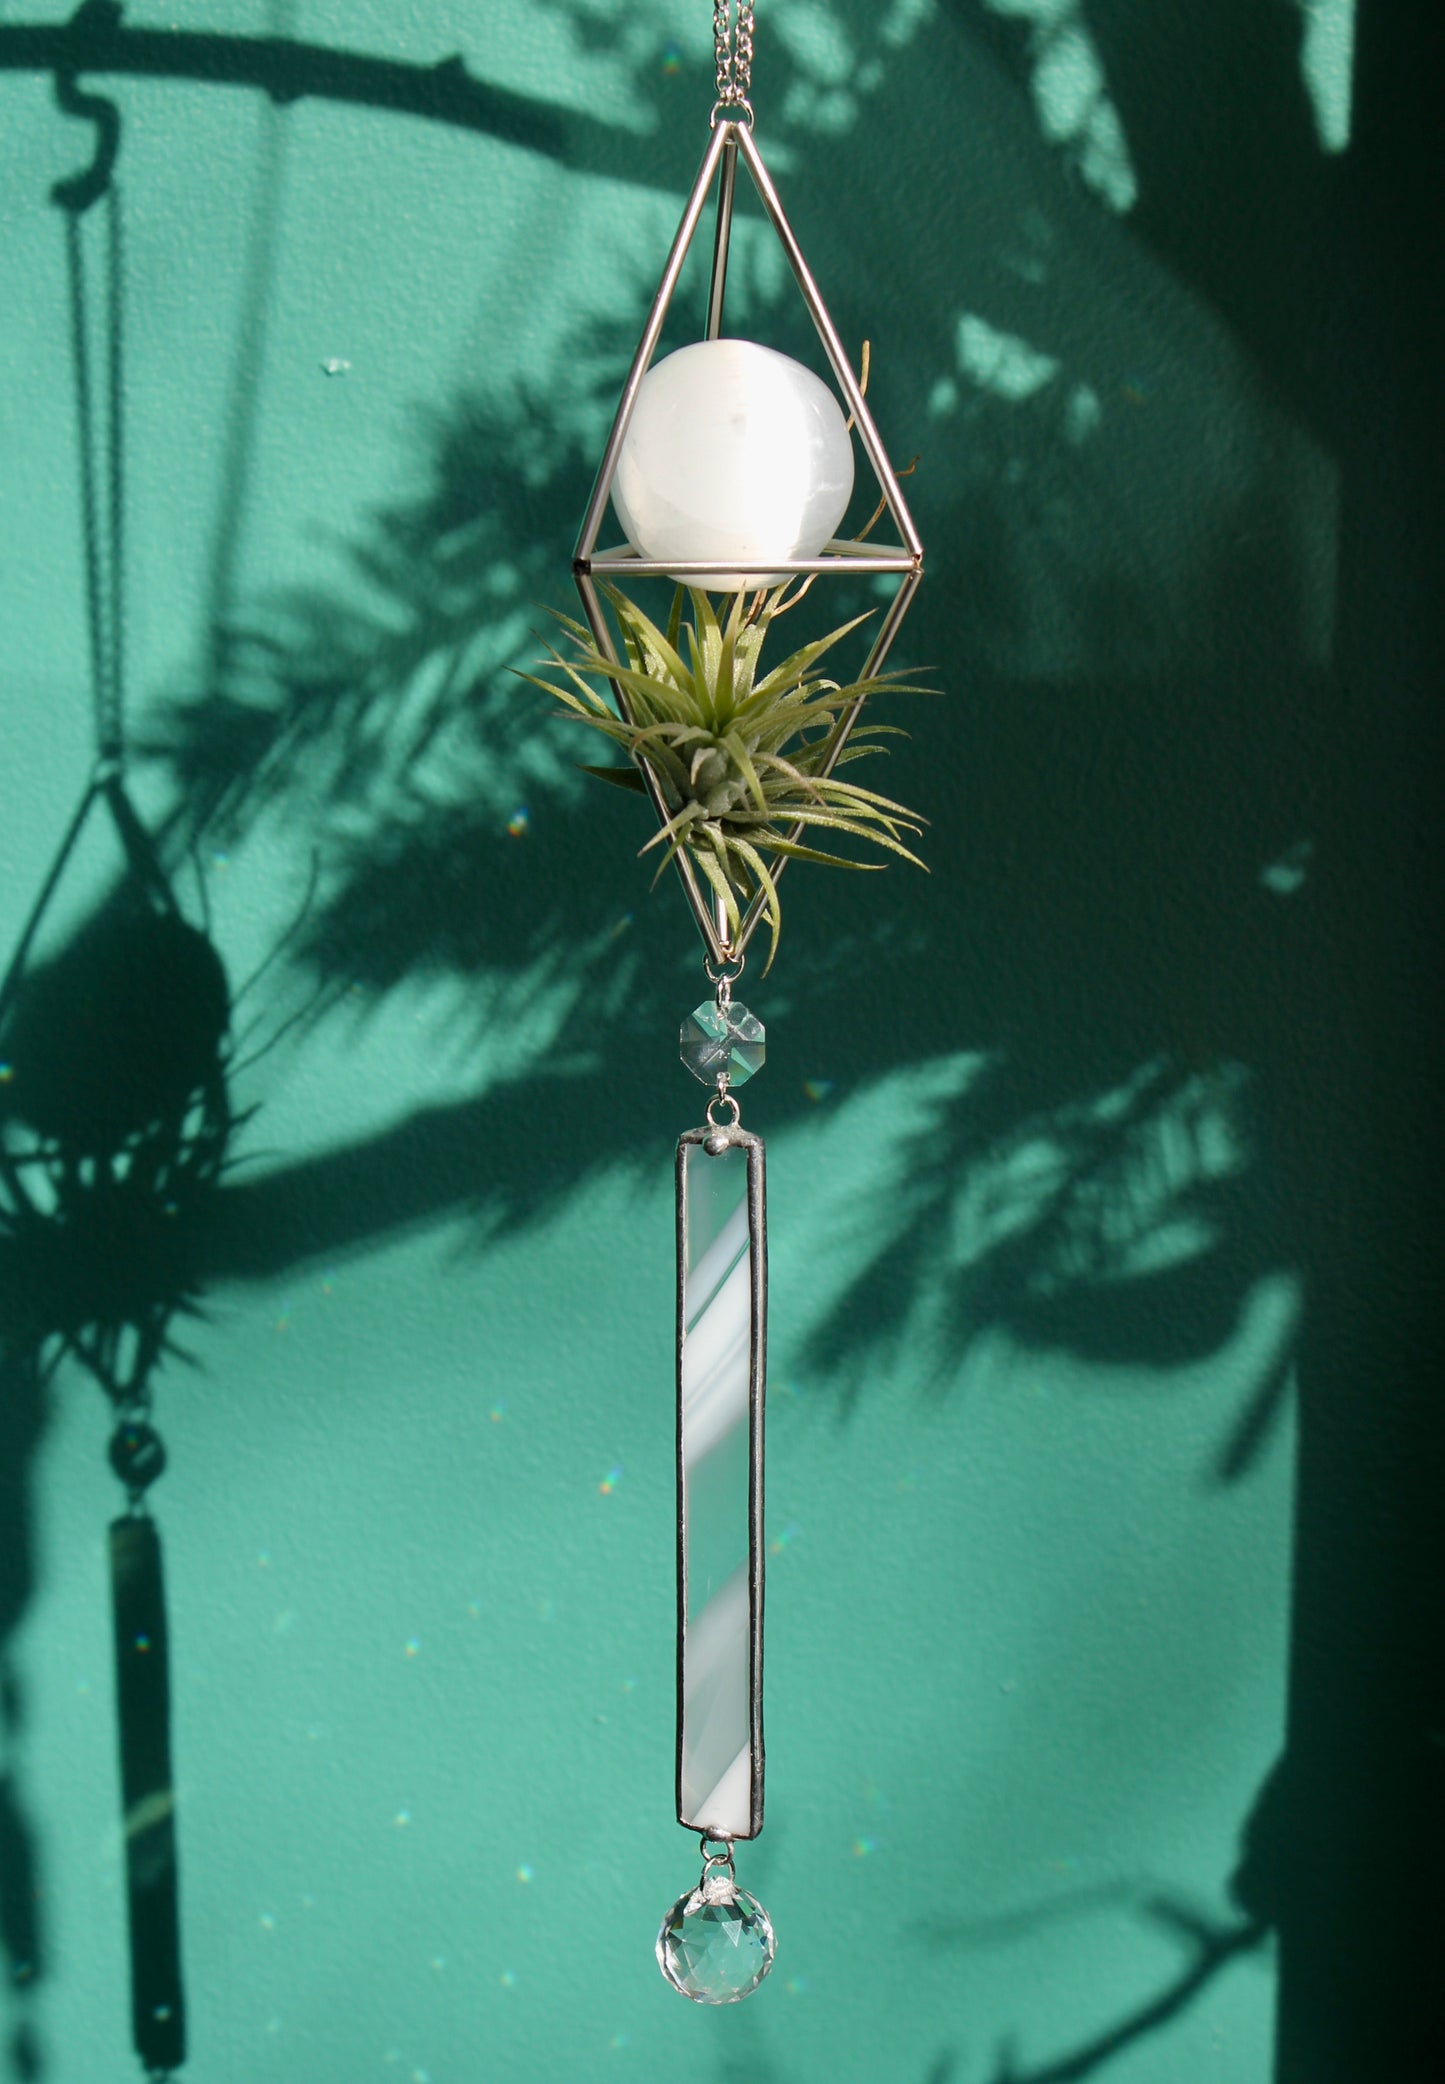 Selenite Sphere Stained Glass Sun Catcher with Air Plant